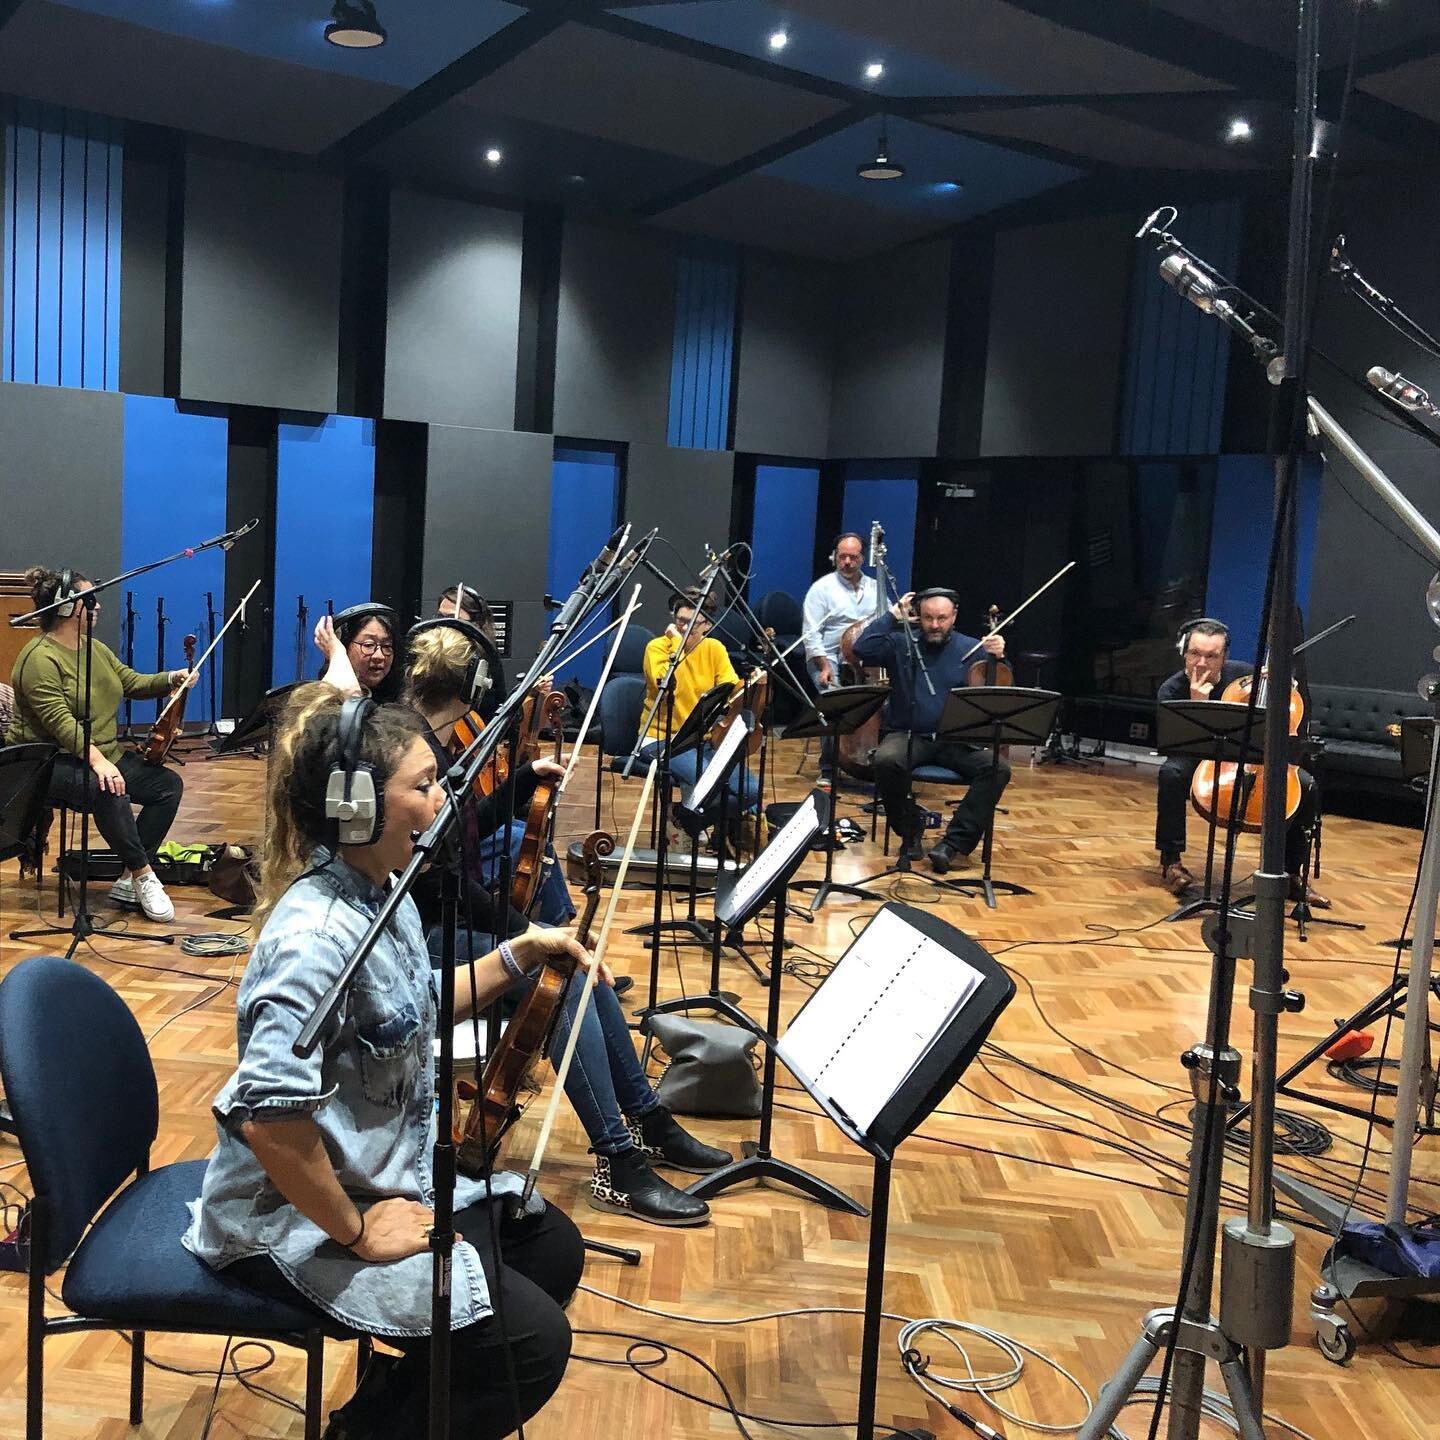 Jared Haschek (@musicguy76) and his (socially distanced) 12 piece string section recording for his new song. Excited to hear everything coming from Jared and the team. 
#stringsection #studio #recordingstudio